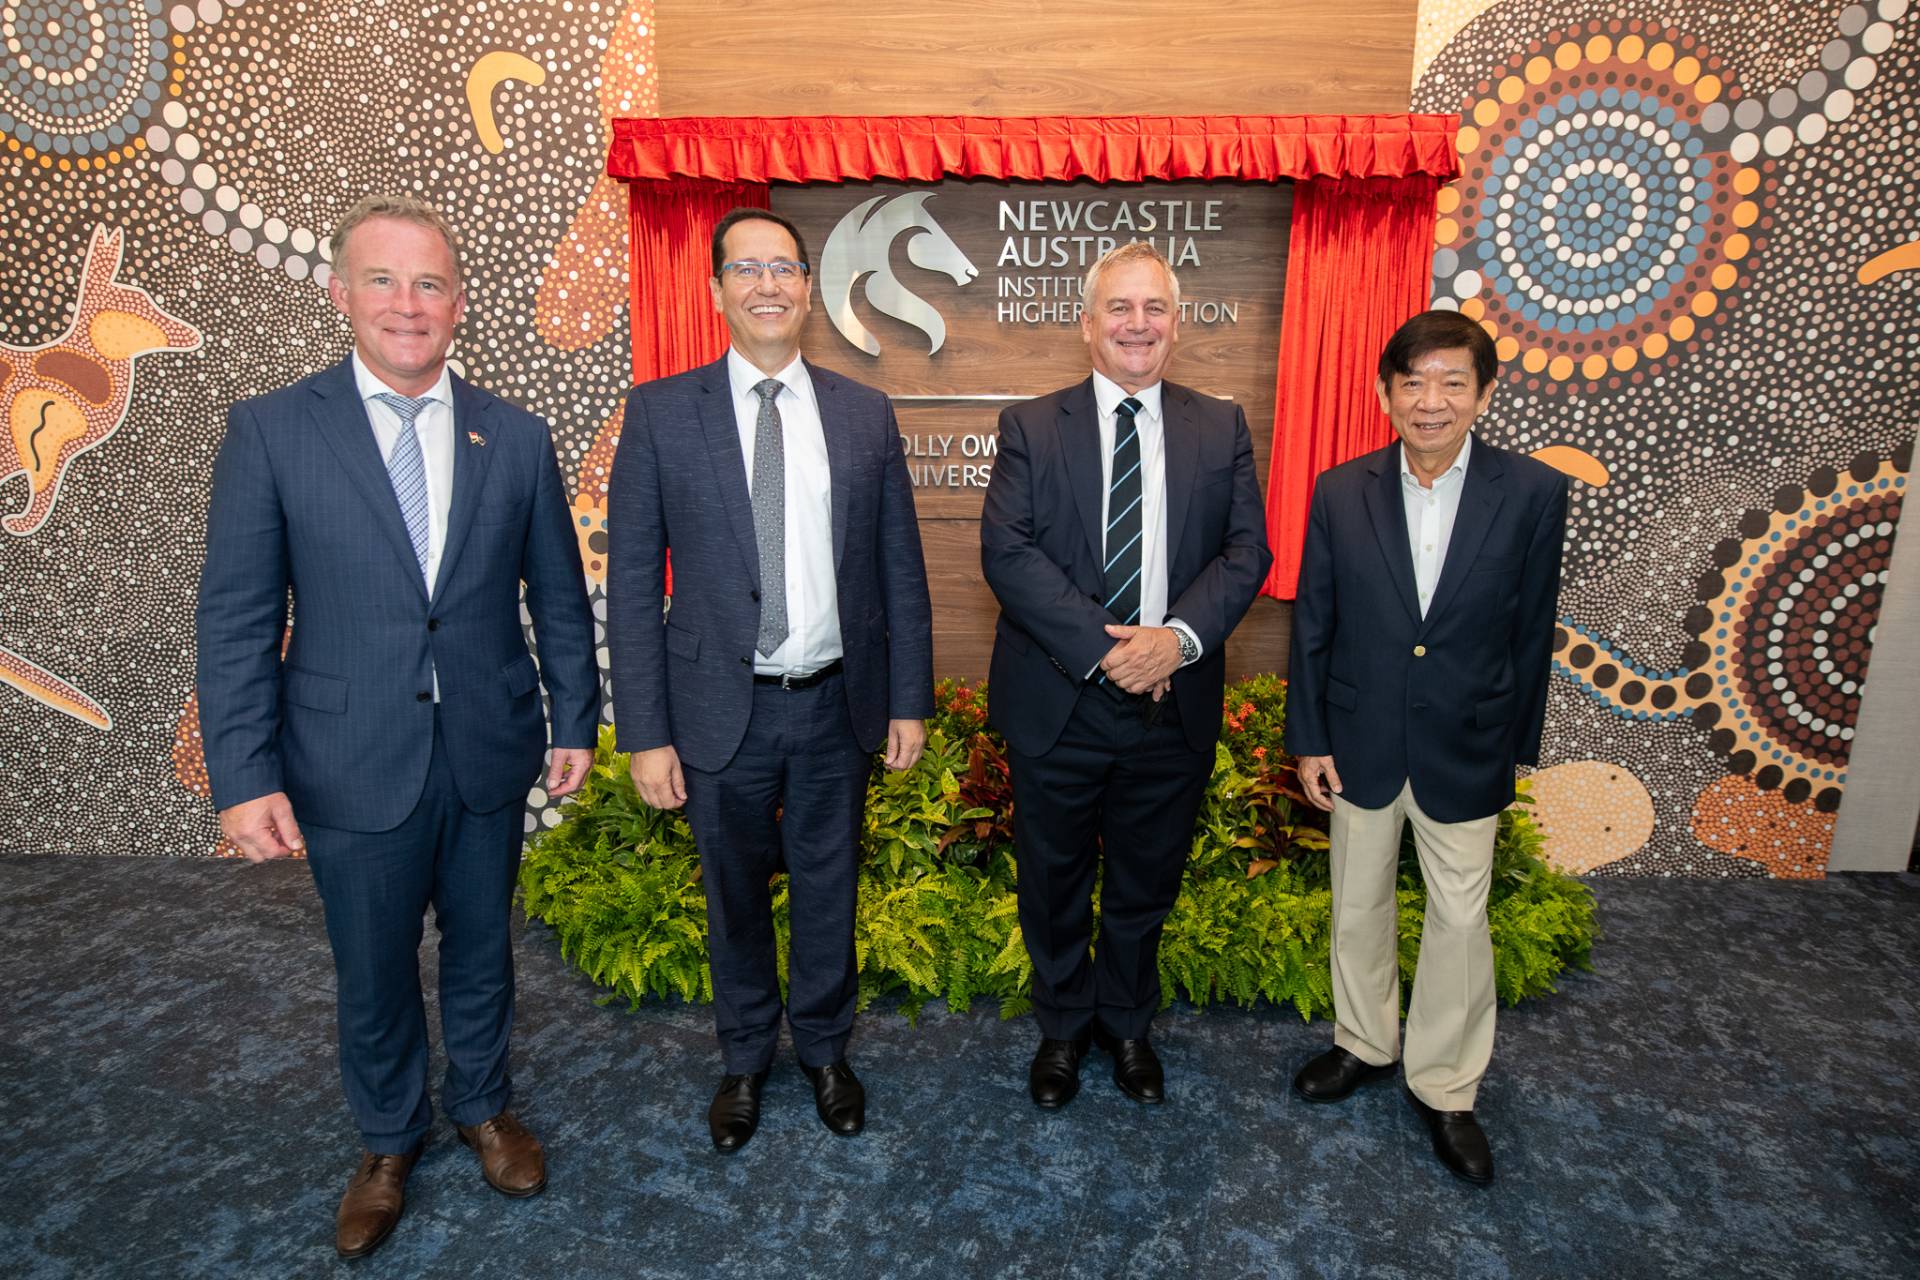 (From left) William Hodgman, Tony Travaglione, Professor Alex Zelinsky, AO and Dr Khaw Boon Wan during the official opening of Newcastle Australia’s campus